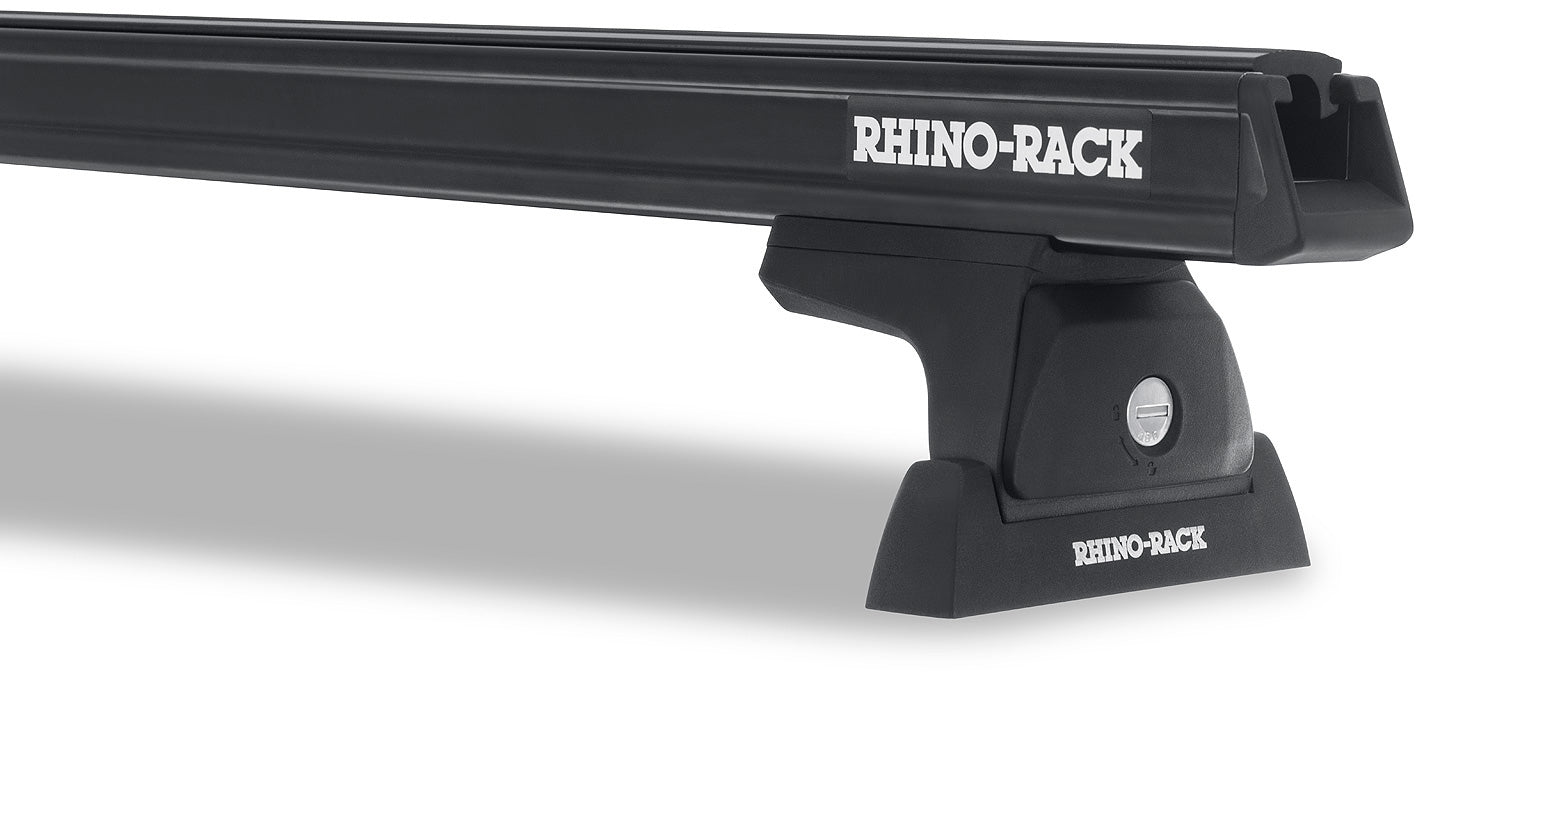 Heavy-duty roof rack kit Rhinorack for Iveco Daily 2014+.